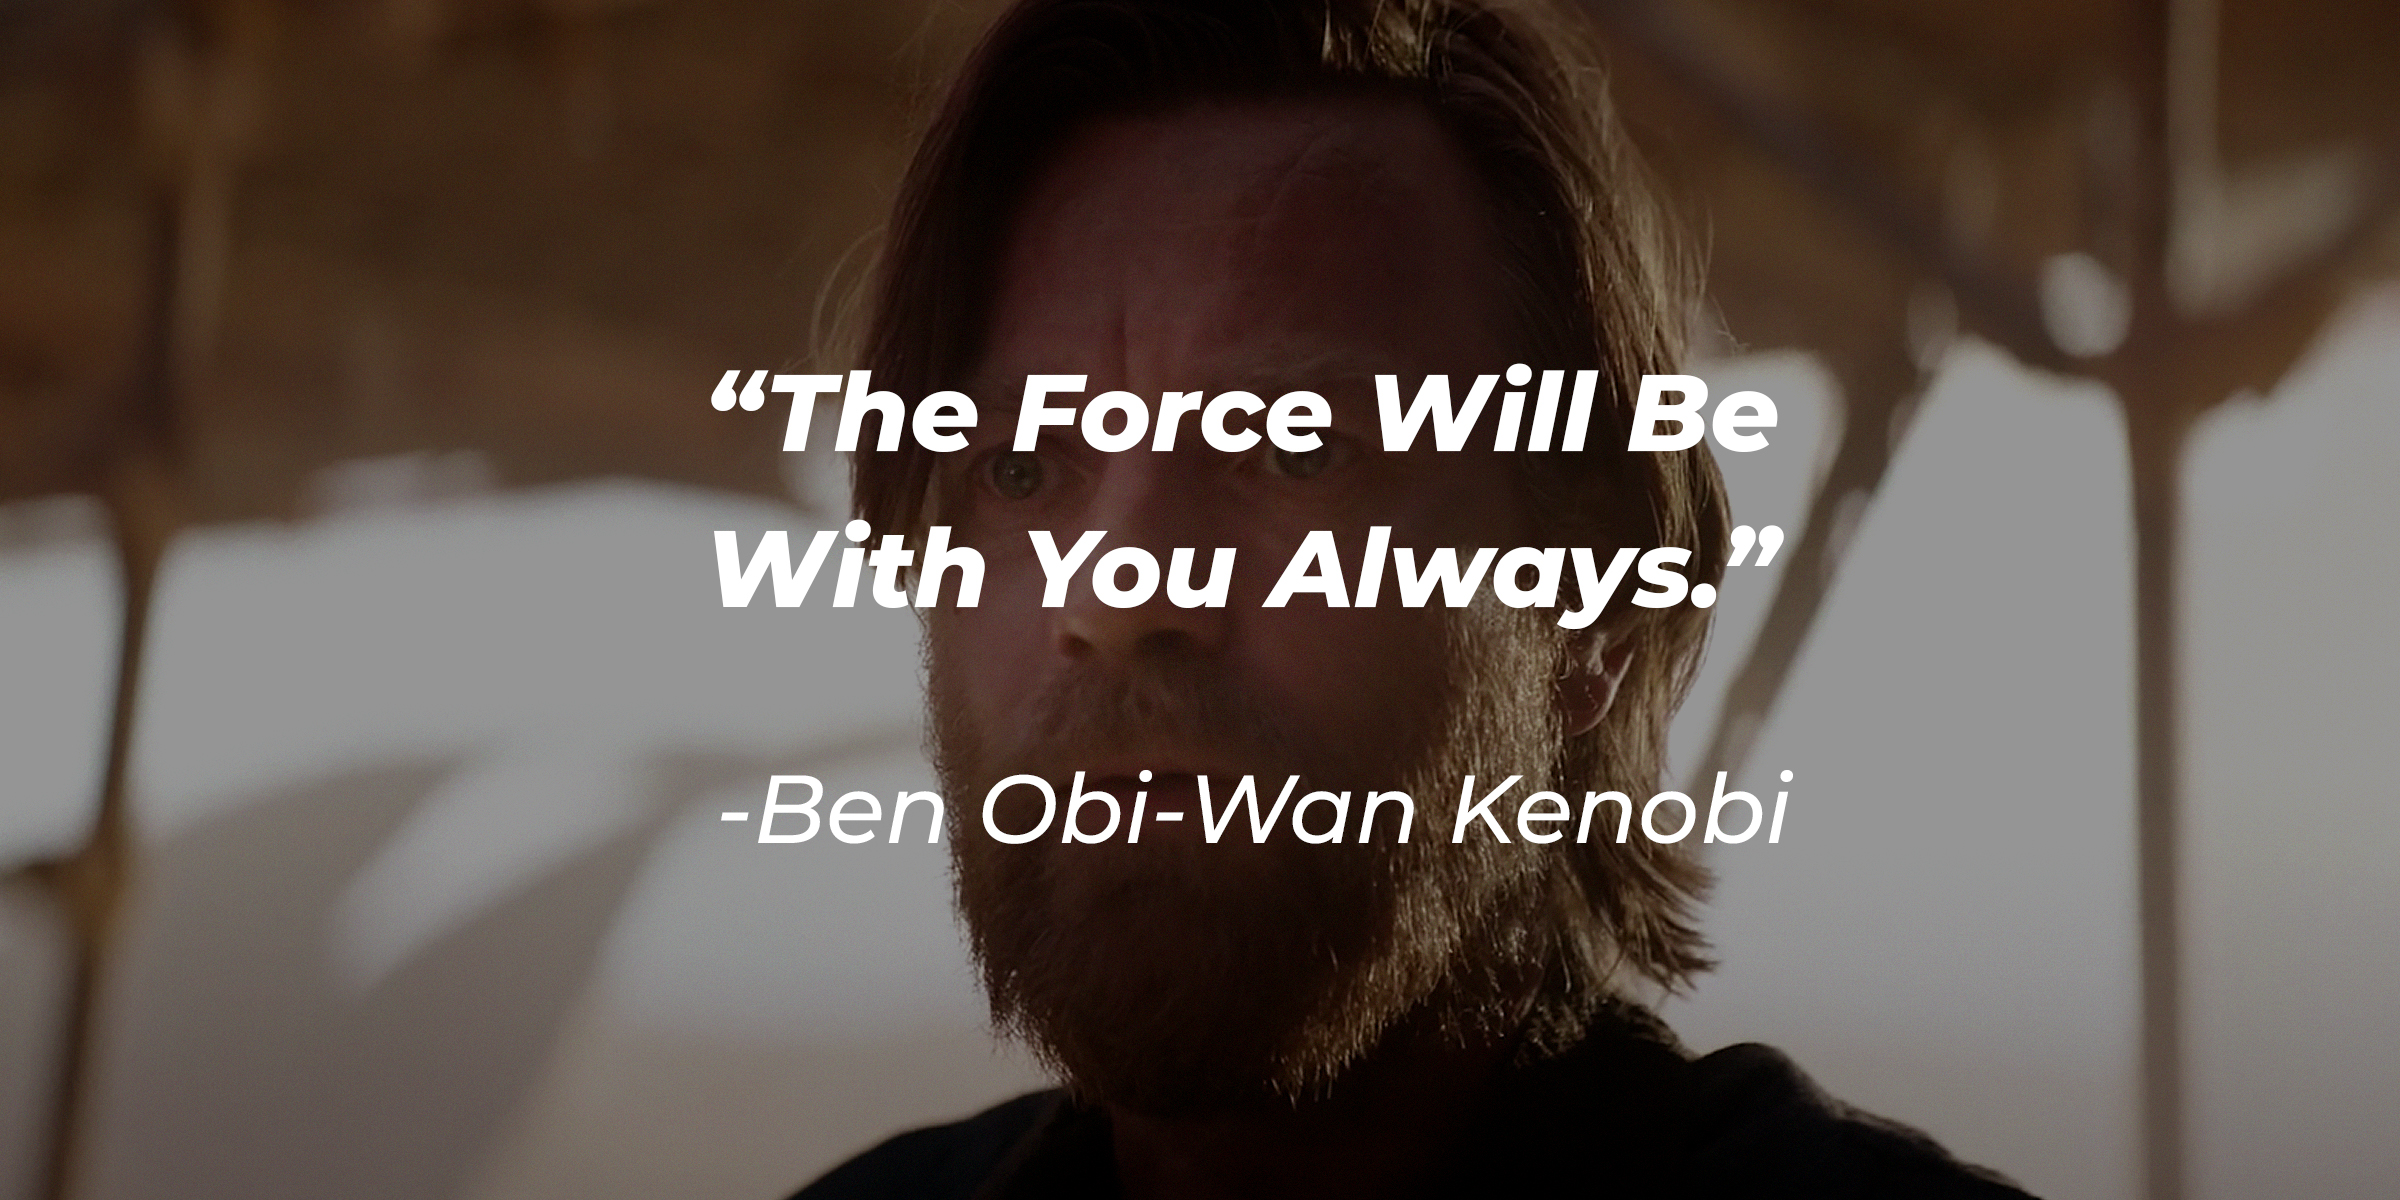 Ben Obi-Wan Kenobi's quote: "The Force Will Be With You Always." | Source: facebook.com/StarWars